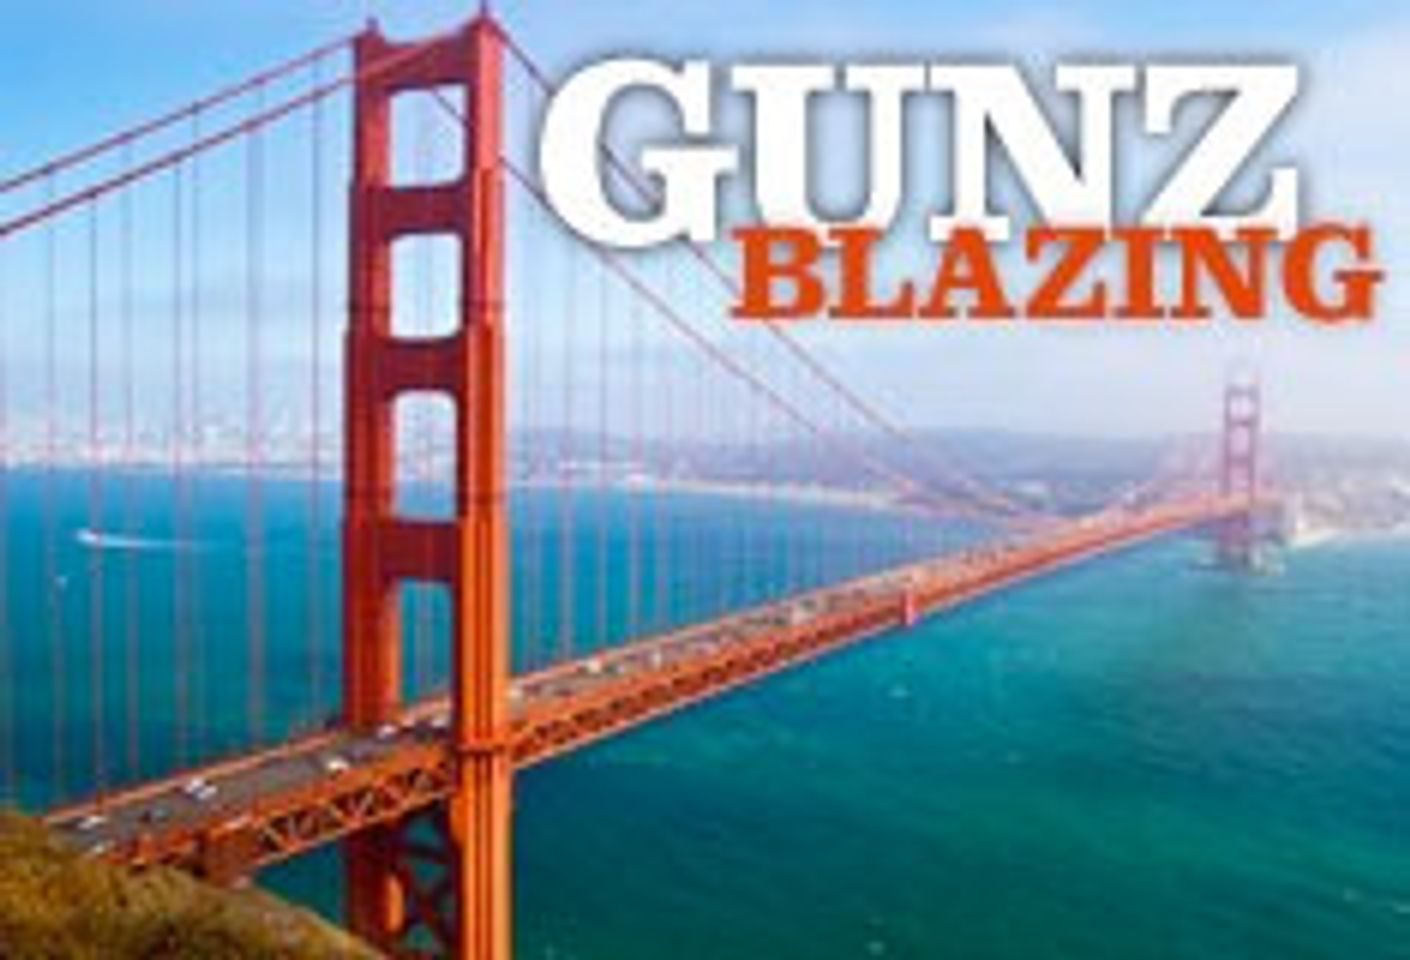 GunzBlazing Launches New Version of Site